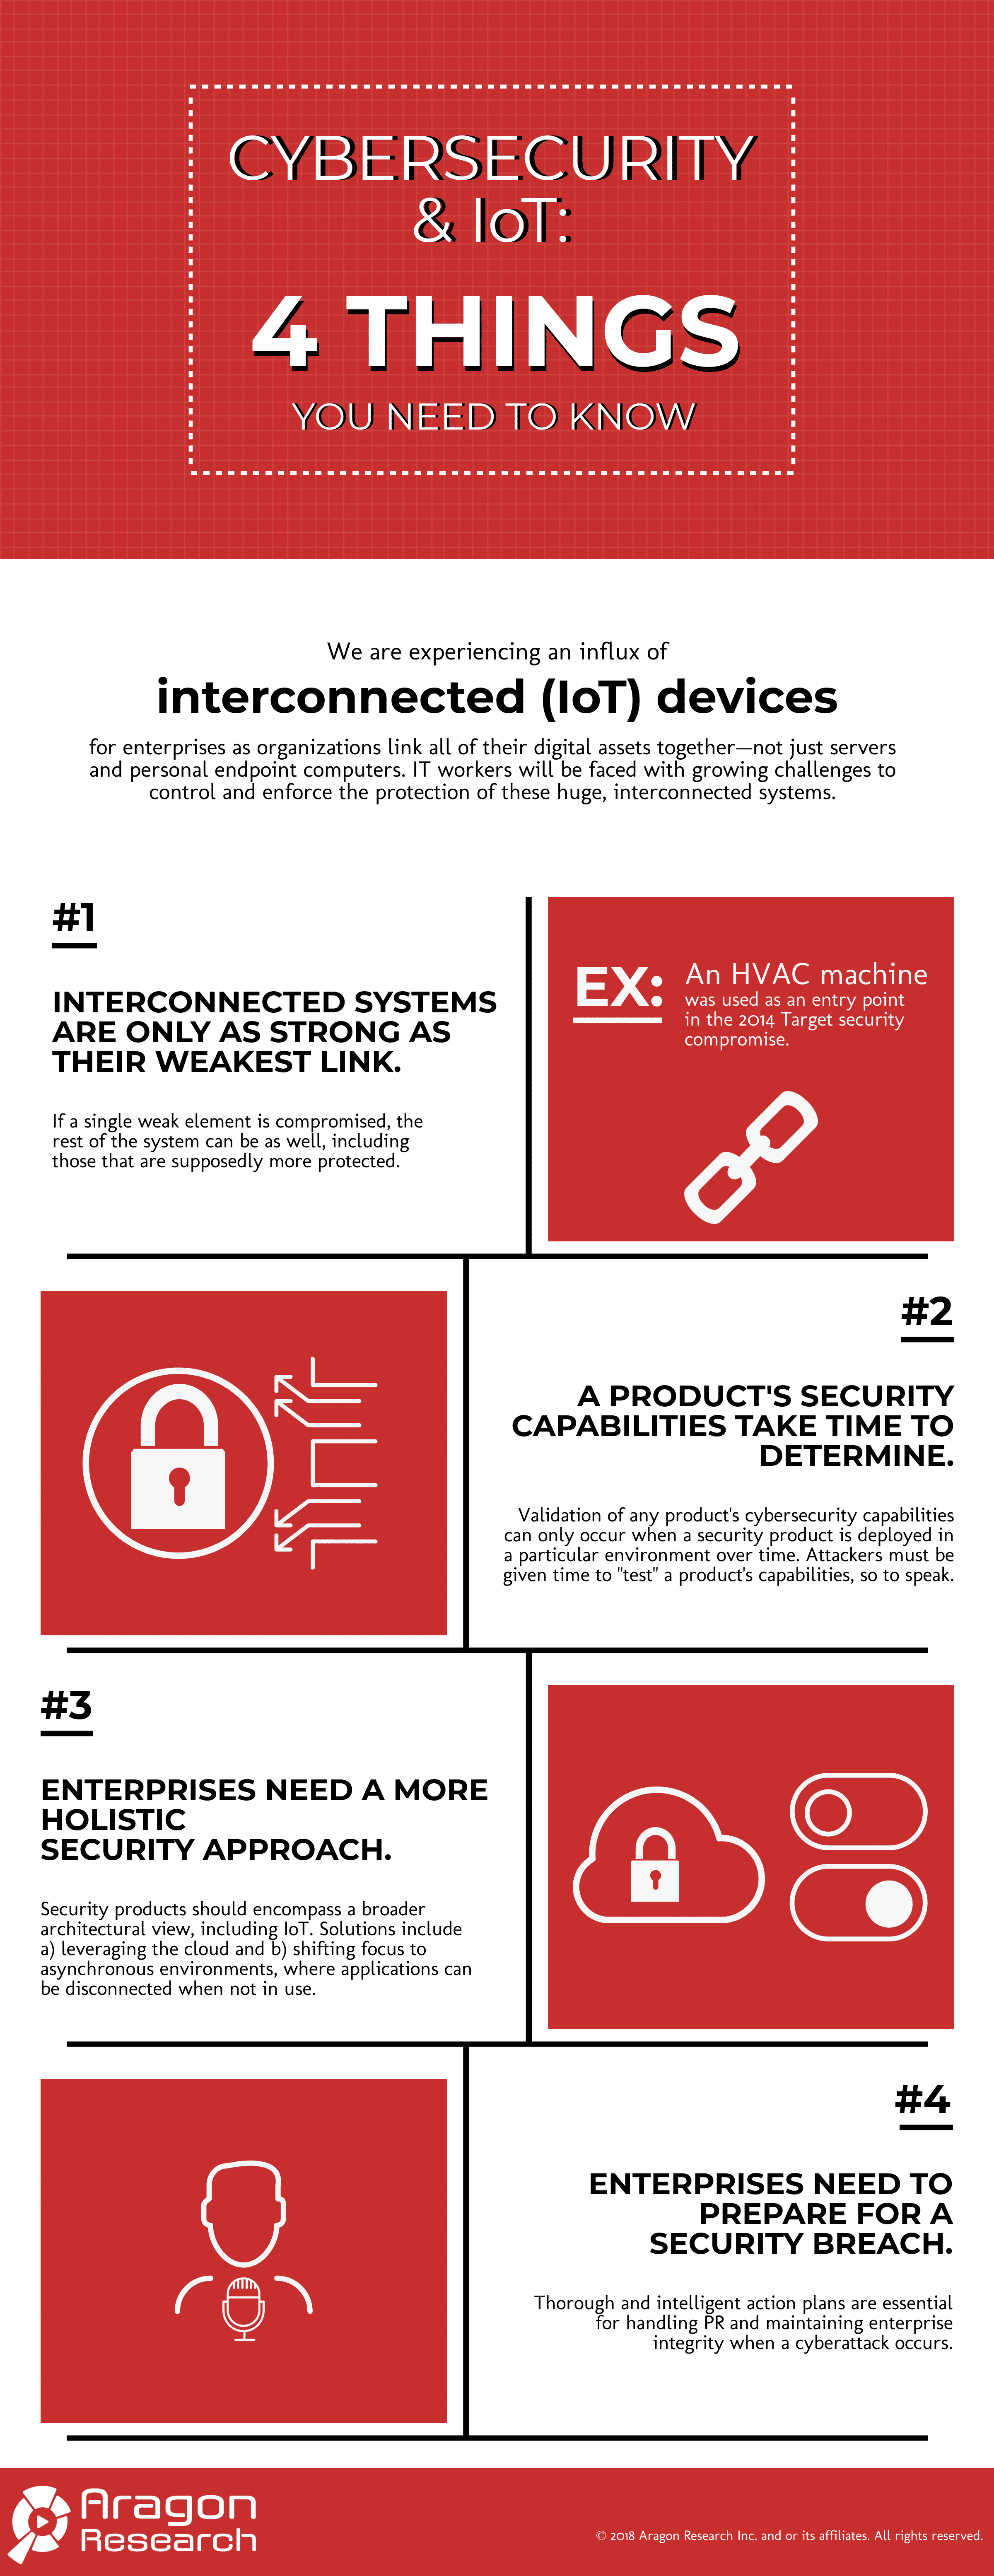 cybersecurity iot 4 things you need to know infographic - [Infographic] Cybersecurity and IoT: 4 Things You Need to Know